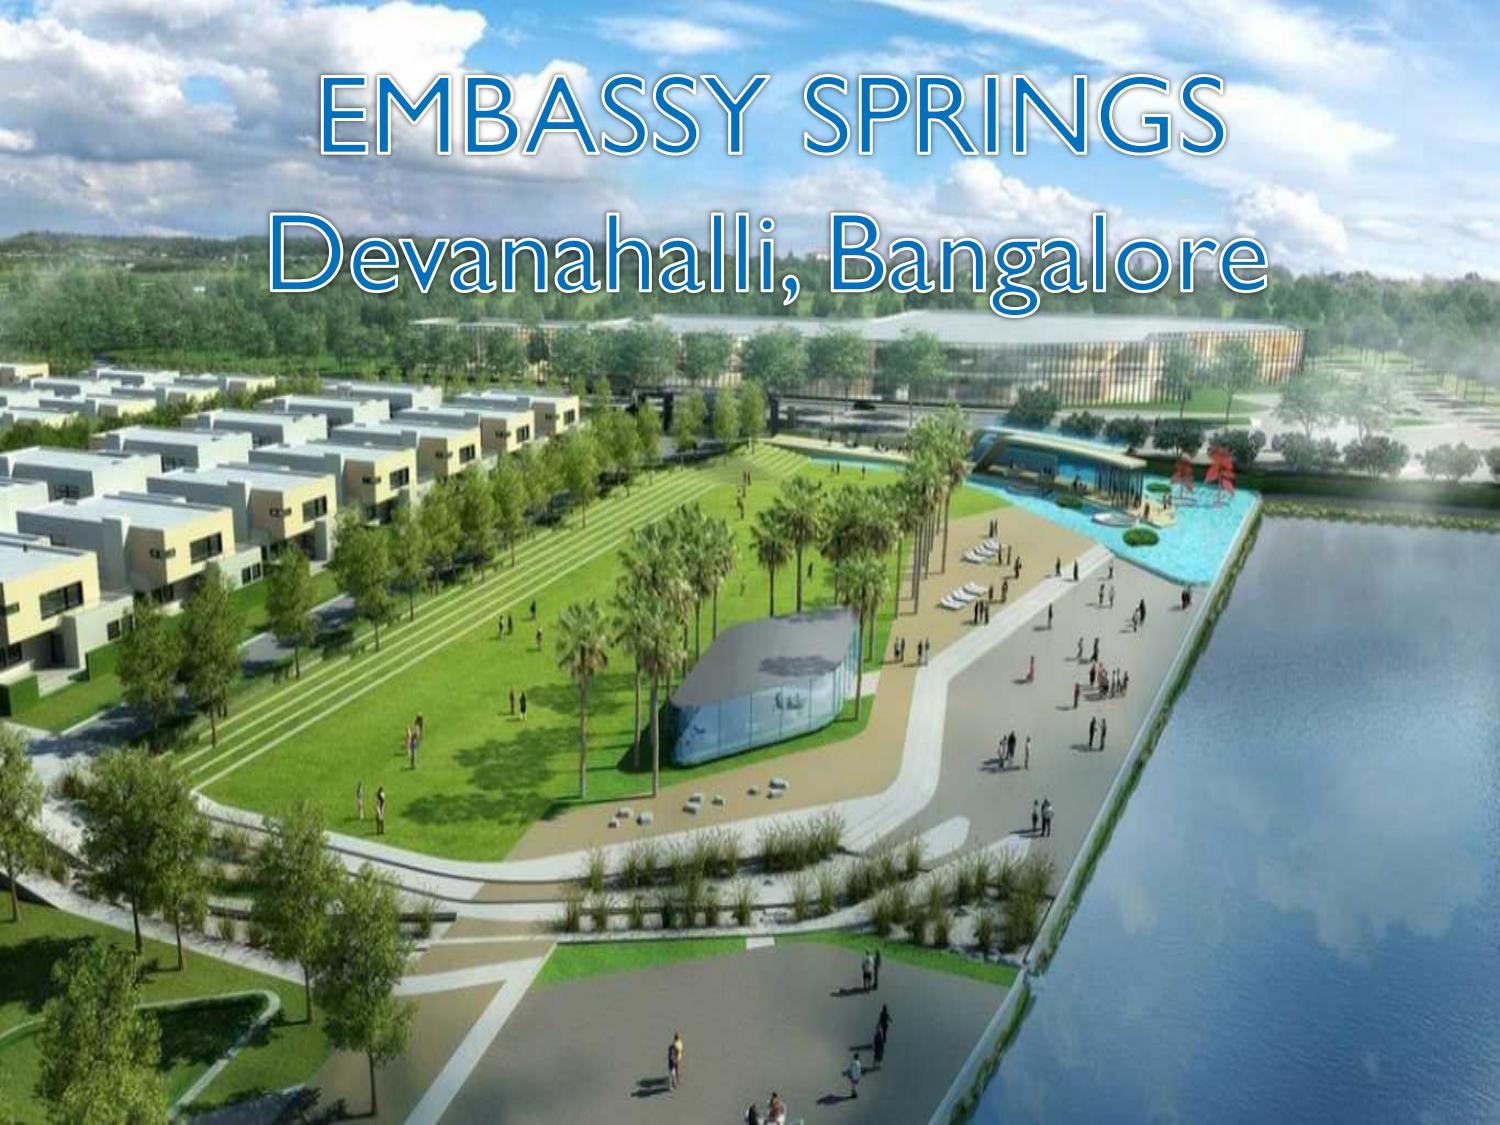 How is Embassy Springs different from Other plots in Devanahalli